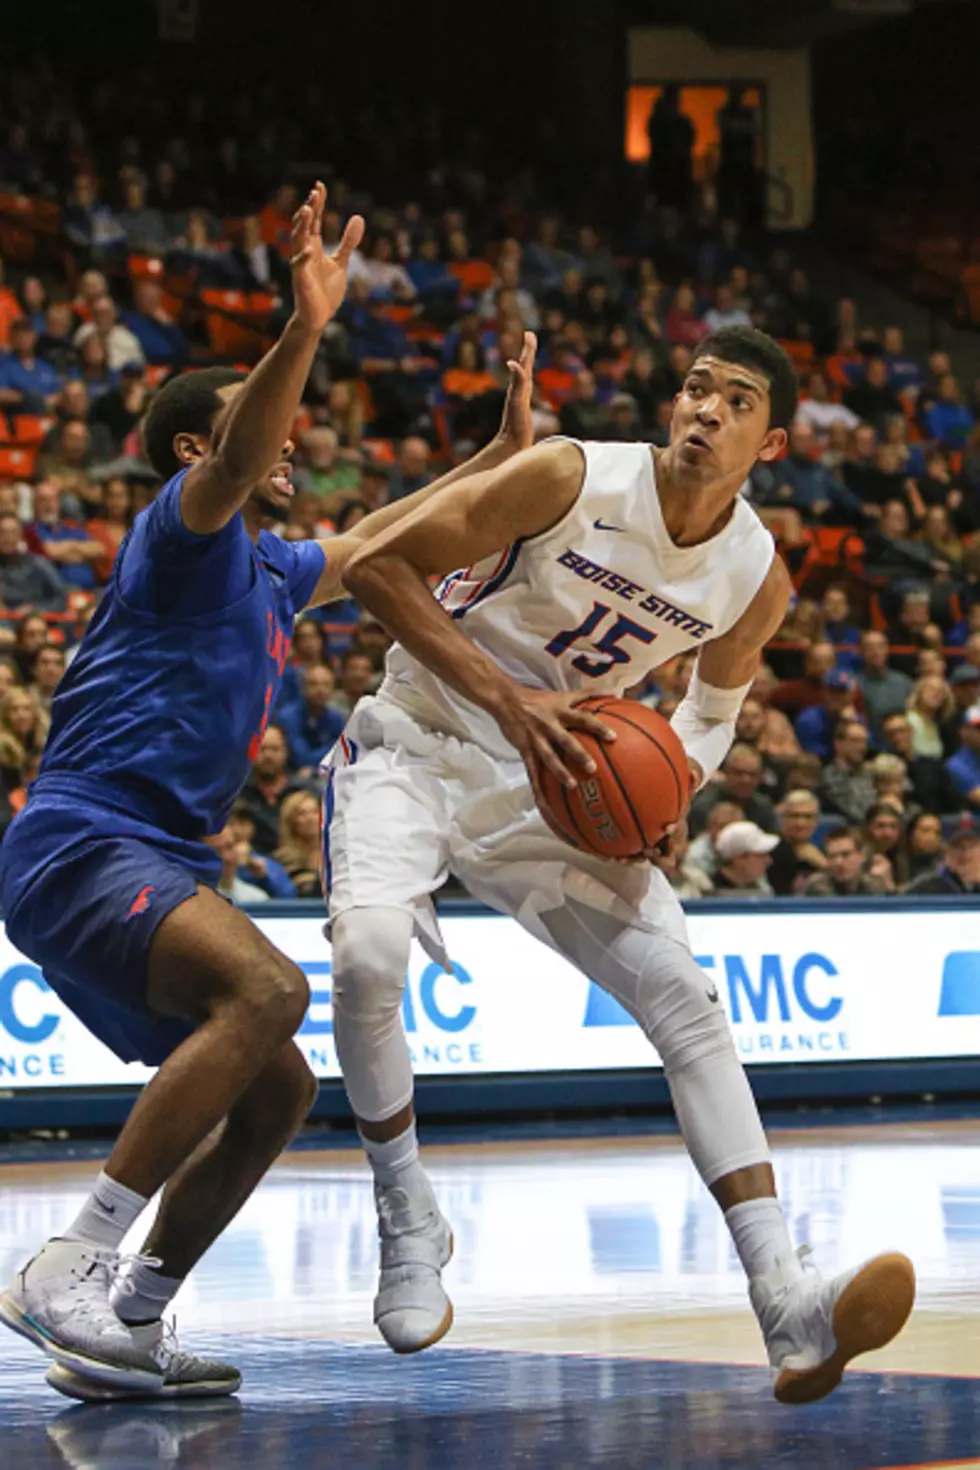 Hutchison Returns to Boise State